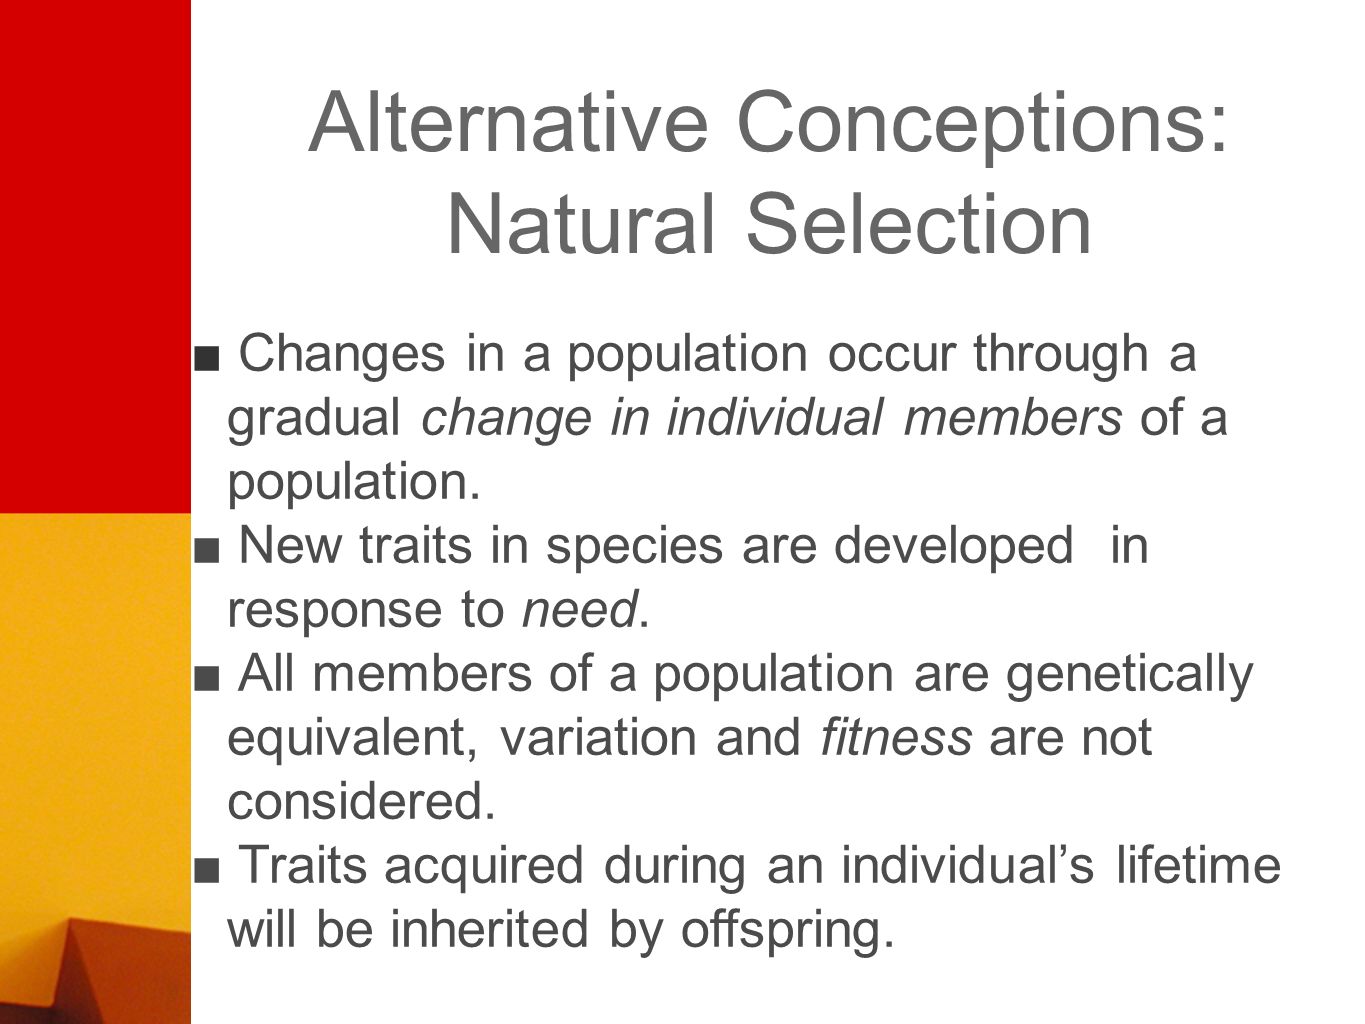 ■ Changes in a population occur through a gradual change in individual members of a population.